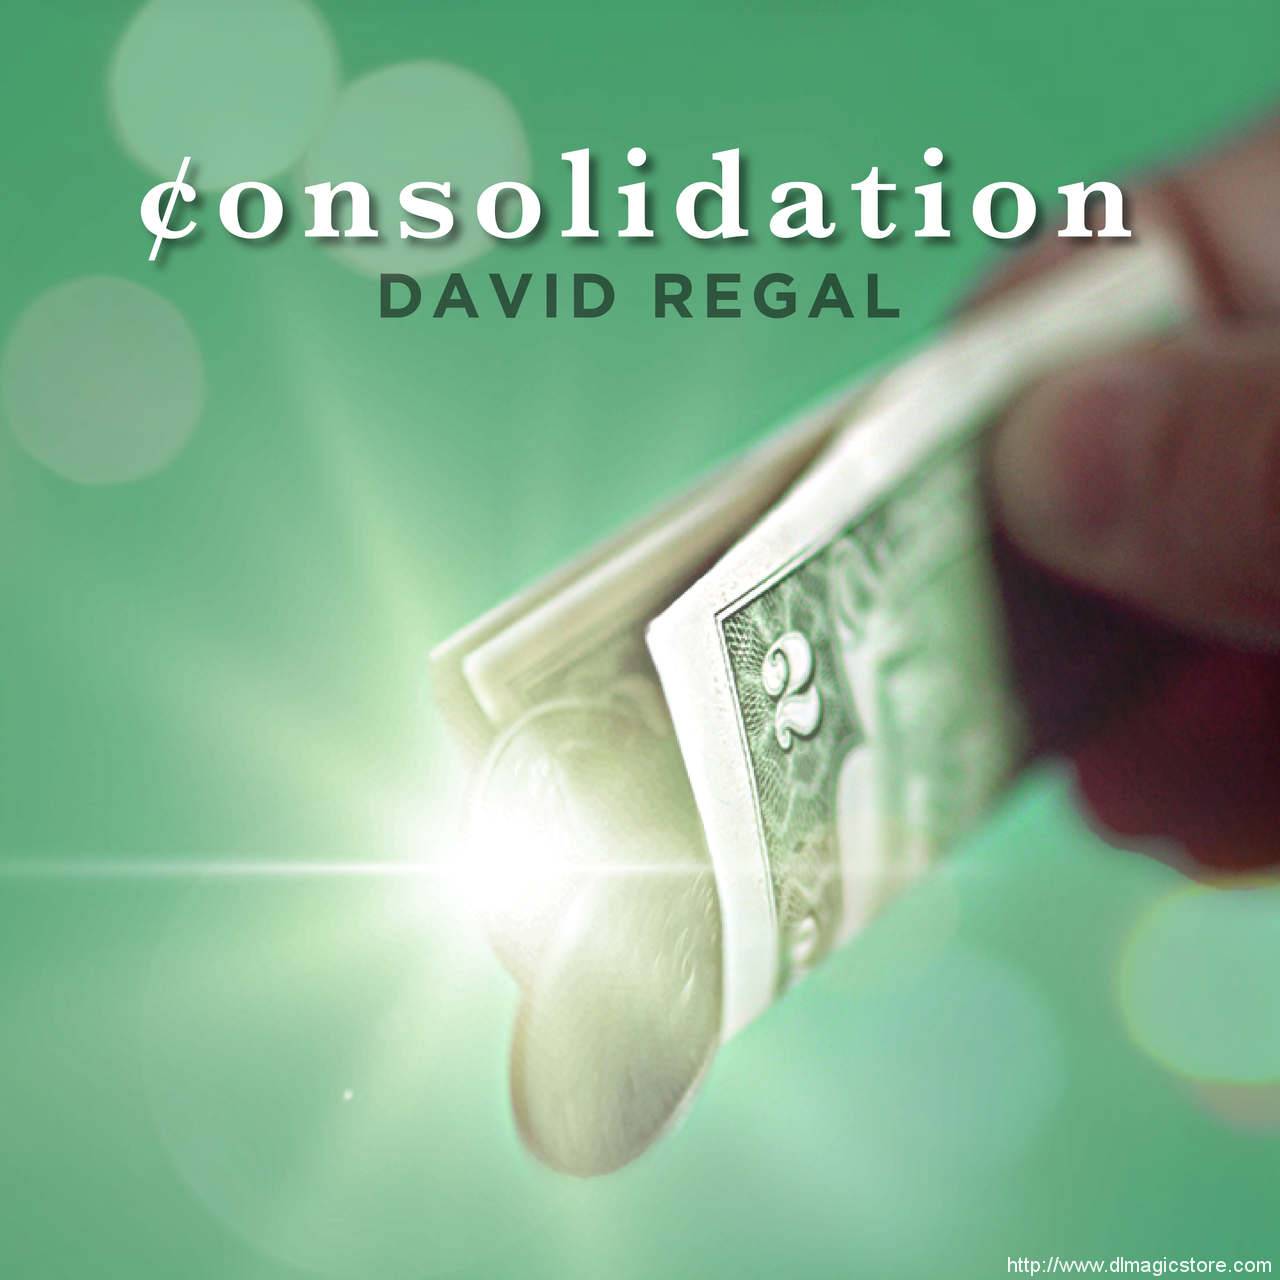 Consolidation by David Regal (Instant Download)